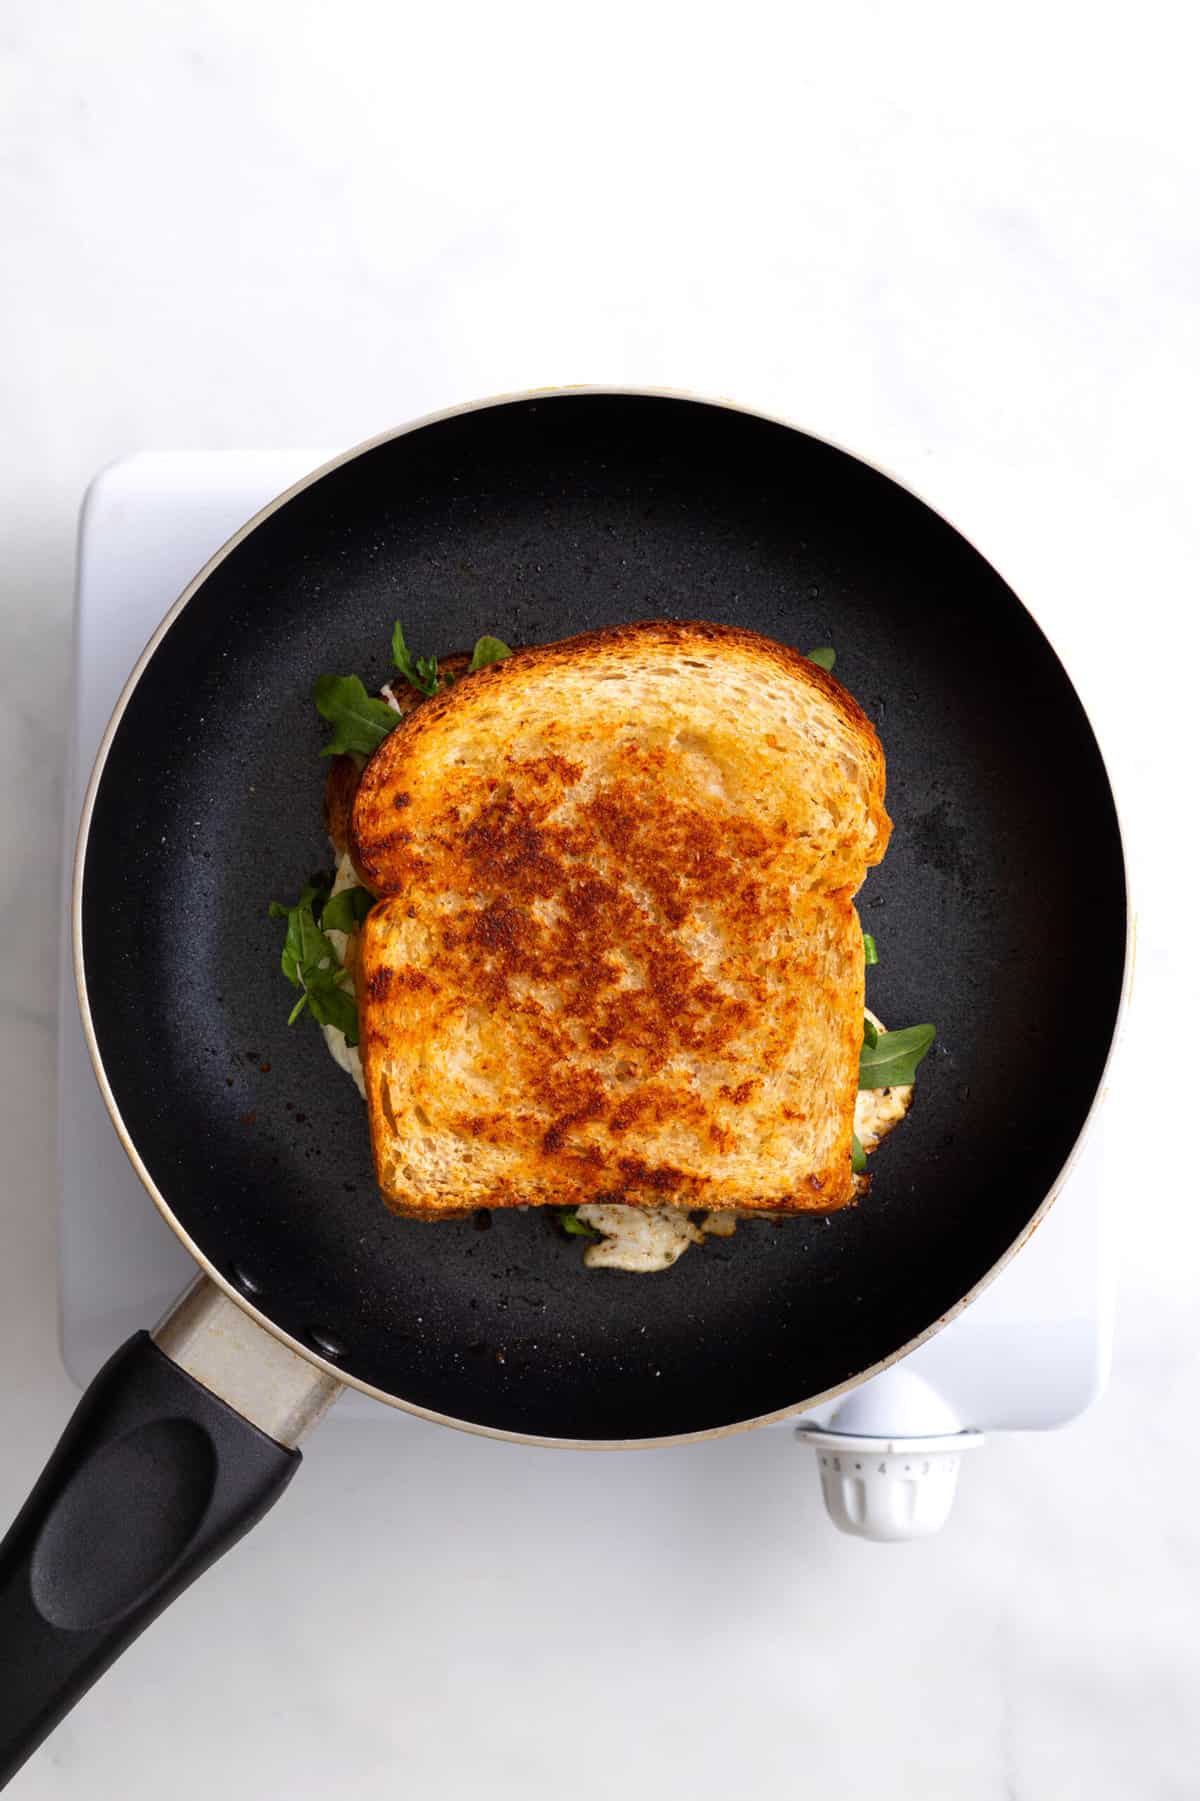 butter slice of white bread on a skillet topped with shredded cheese, a fried egg and fresh arugula and another slice of buttered toast to close the sandwich